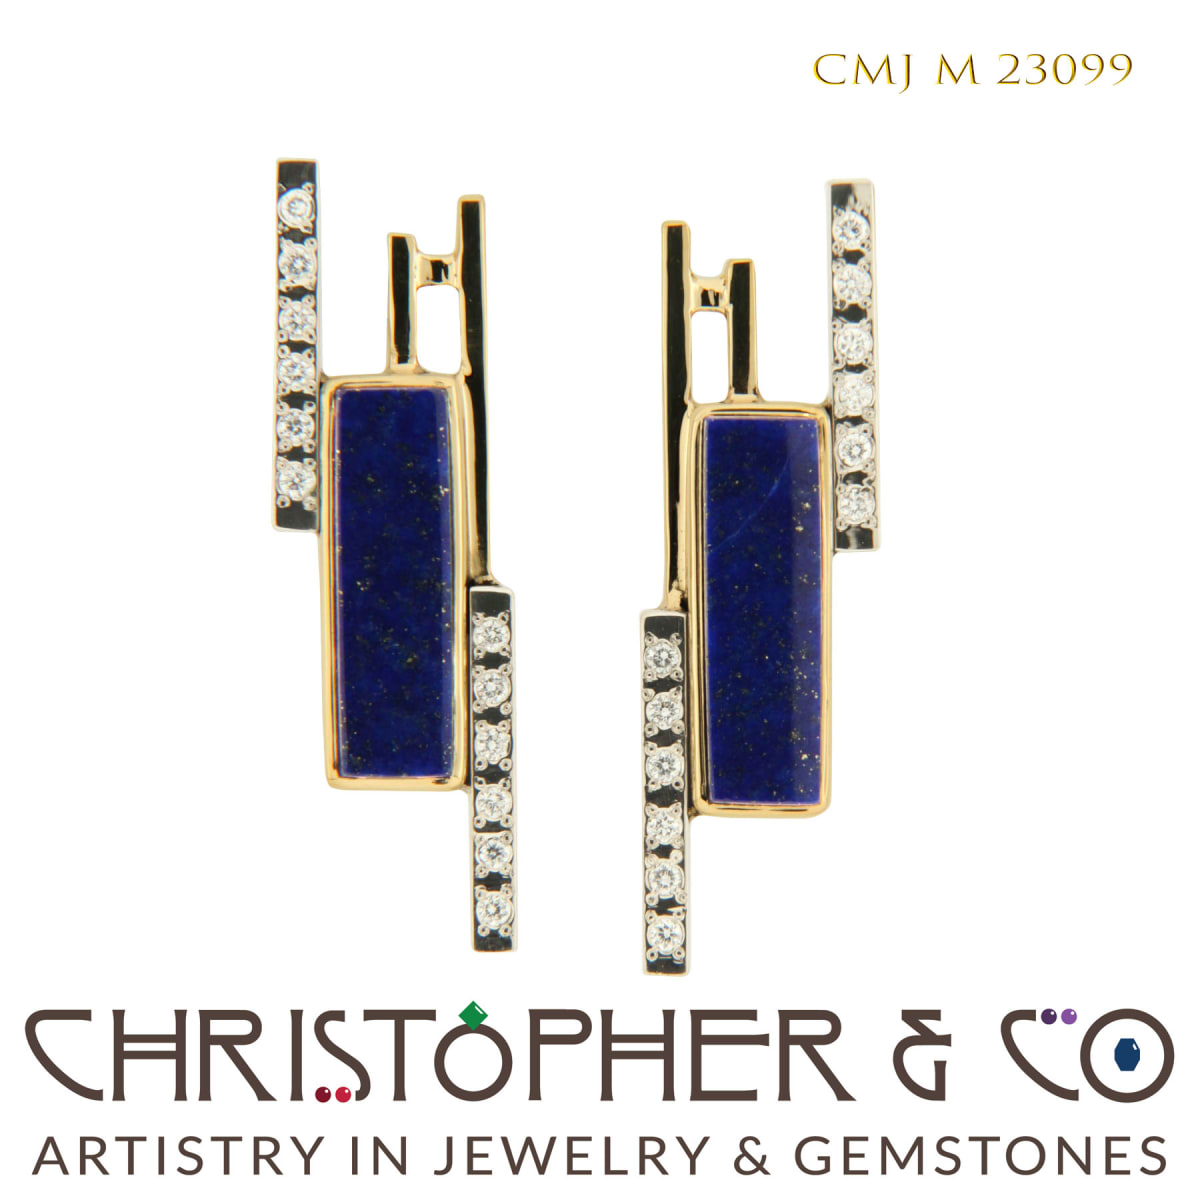 CMJ M 23099  Gold Earring Pair by Christopher M. Jupp set with diamonds and lapis lazuli. by Christopher M. Jupp  Image: CMJ M 23099  Gold Earring Pair by Christopher M. Jupp set with diamonds and lapis lazuli.